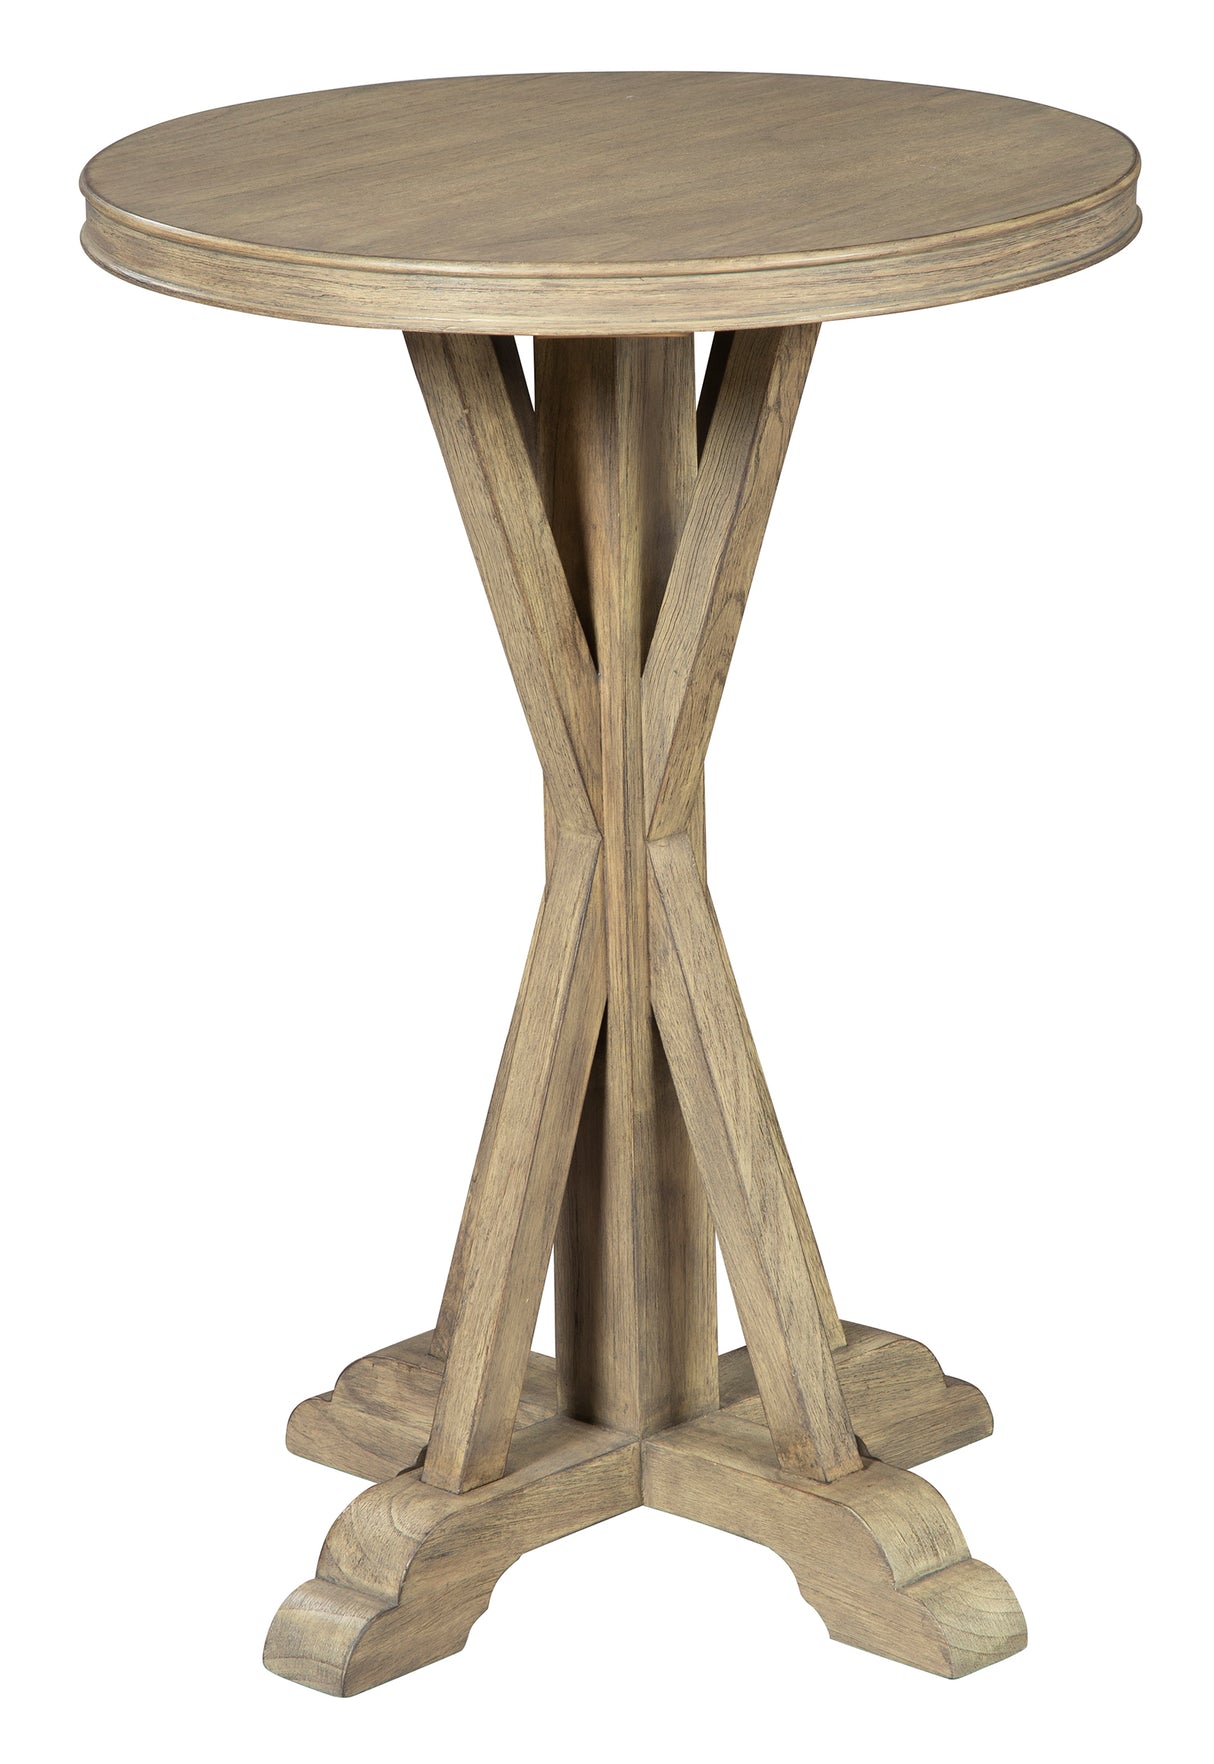 Hekman 28451 Accents 18.25in. x 18.25in. x 26.5in. End Table